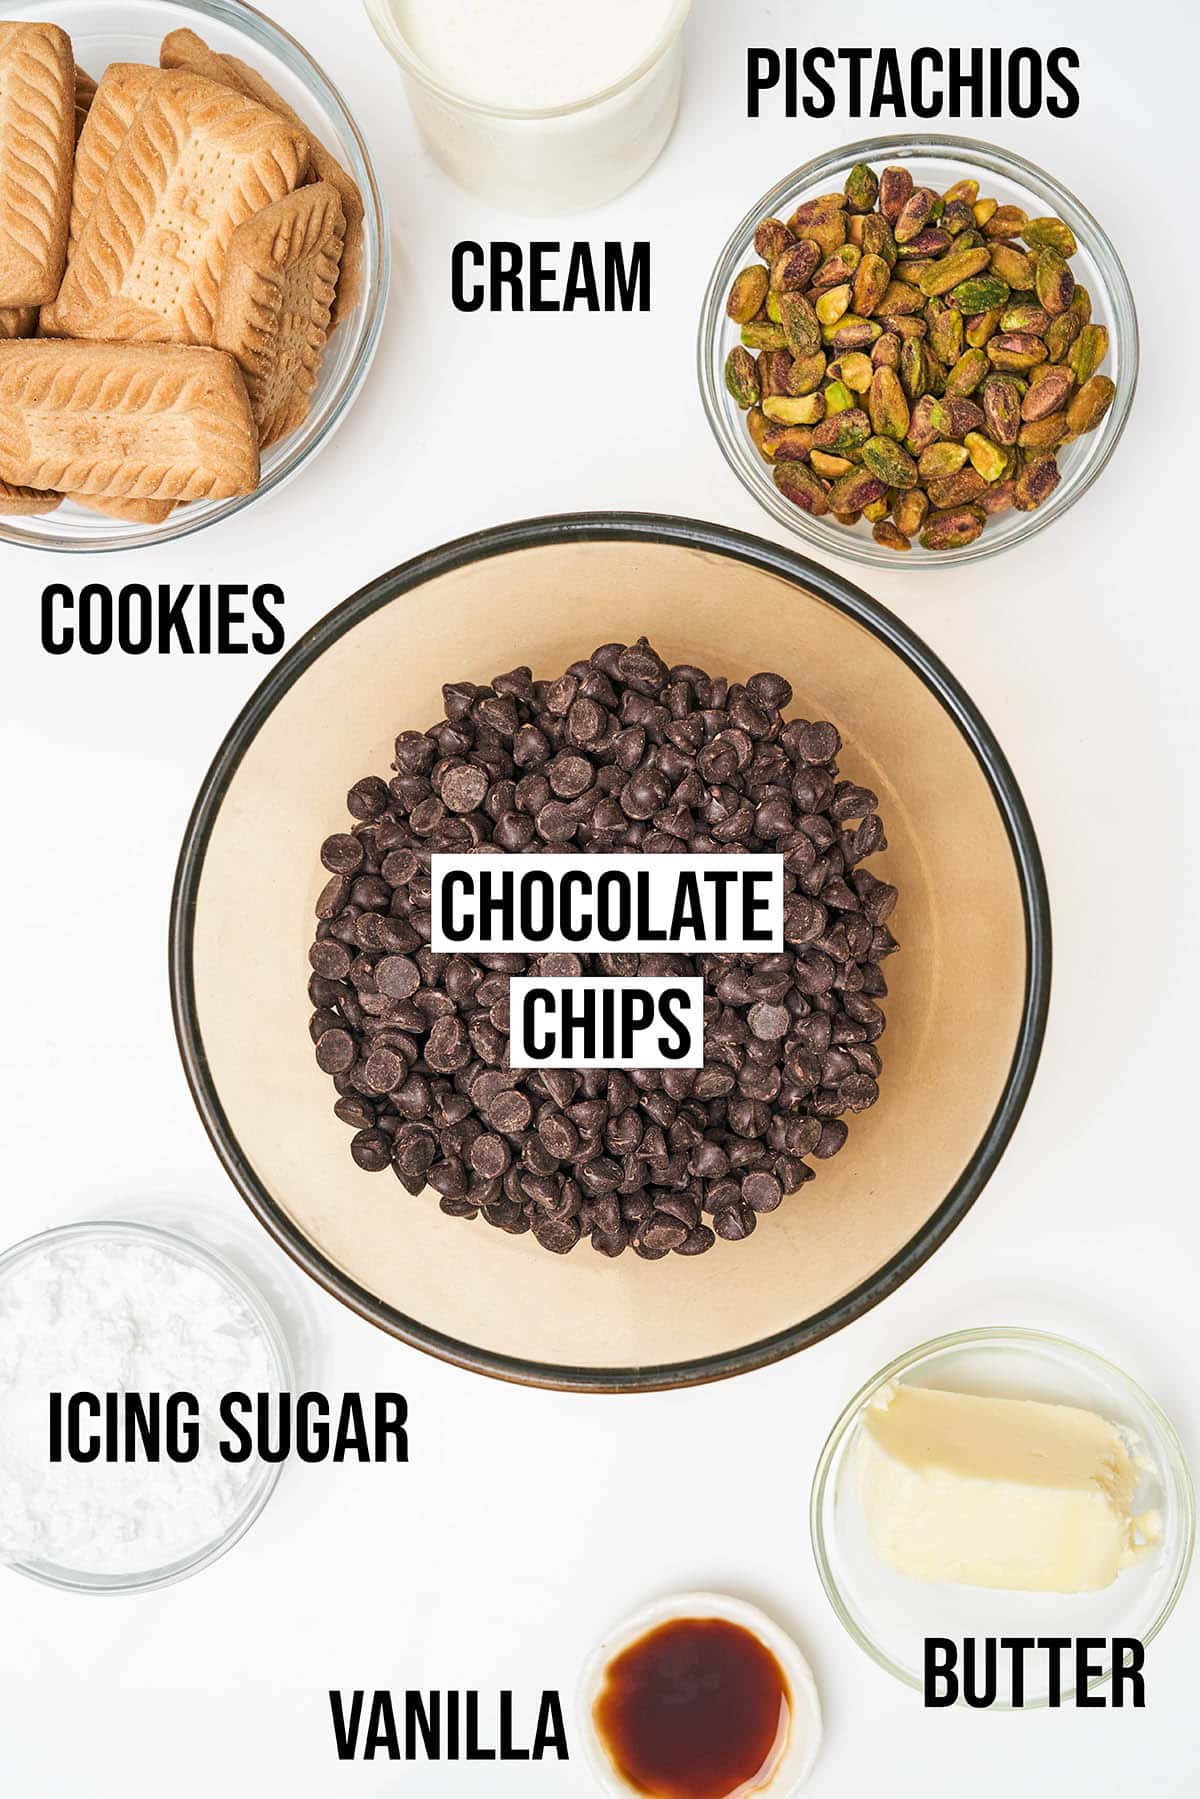 Chocolate salami ingredients with labels.